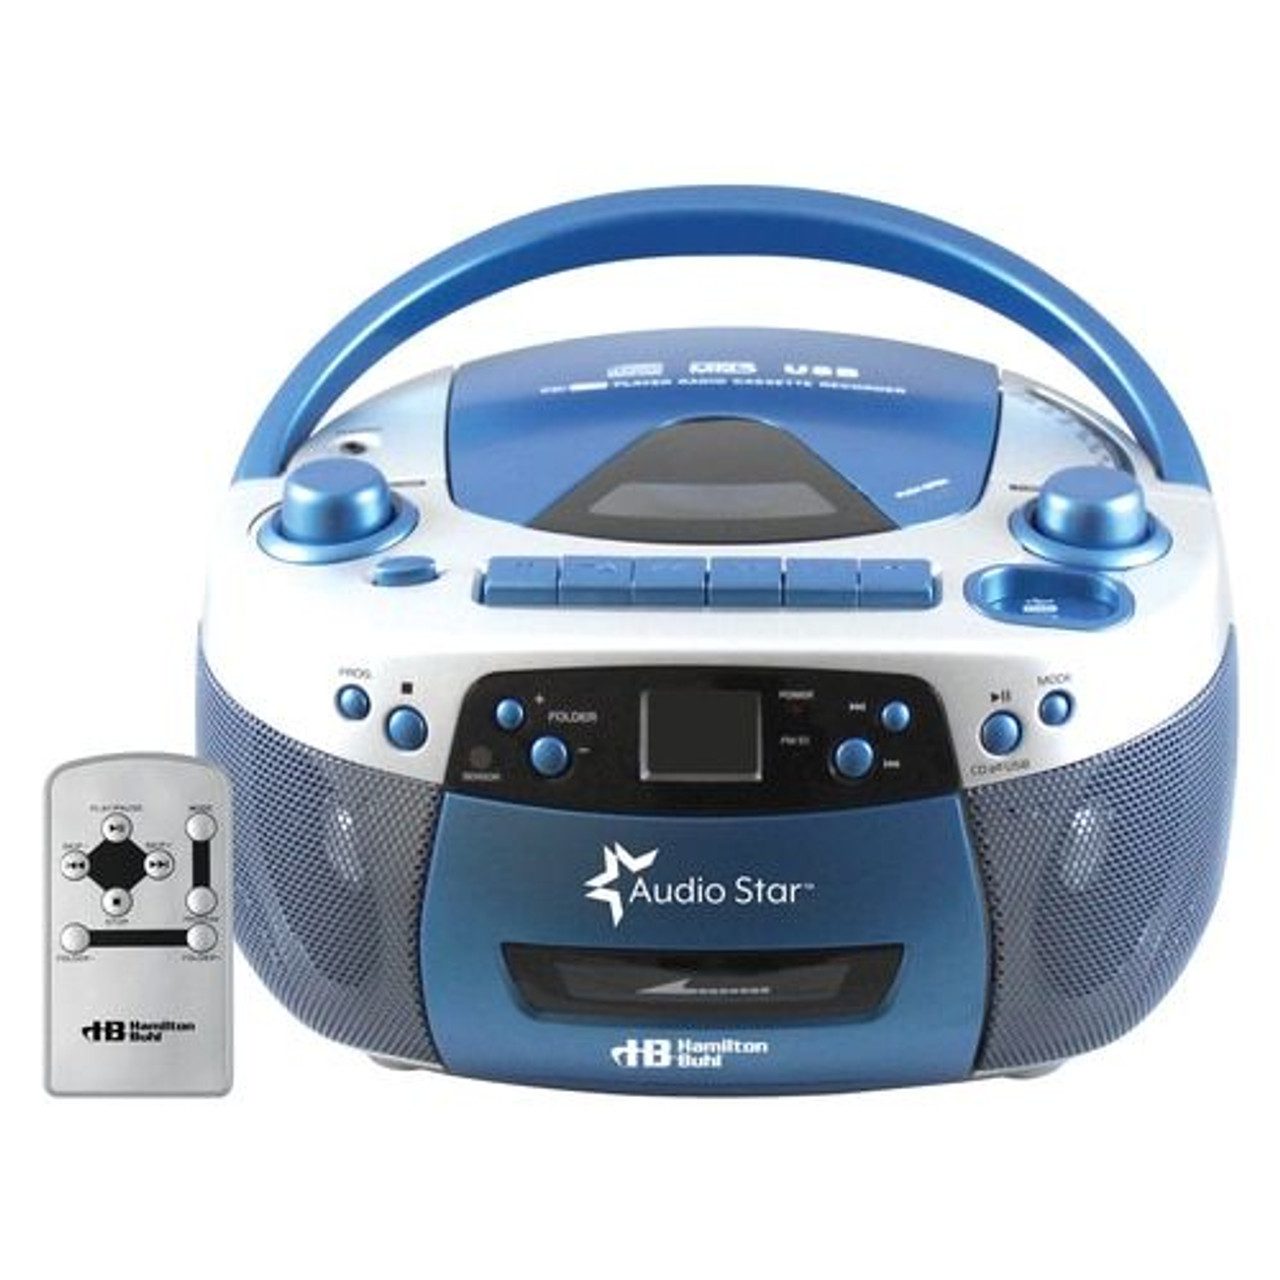 The AudioStar™ from HamiltonBuhl® is a unique portable boombox that plays everything from old technology like radio and cassette tapes to the latest including CDs and MP3 files on CD, or USB stick.